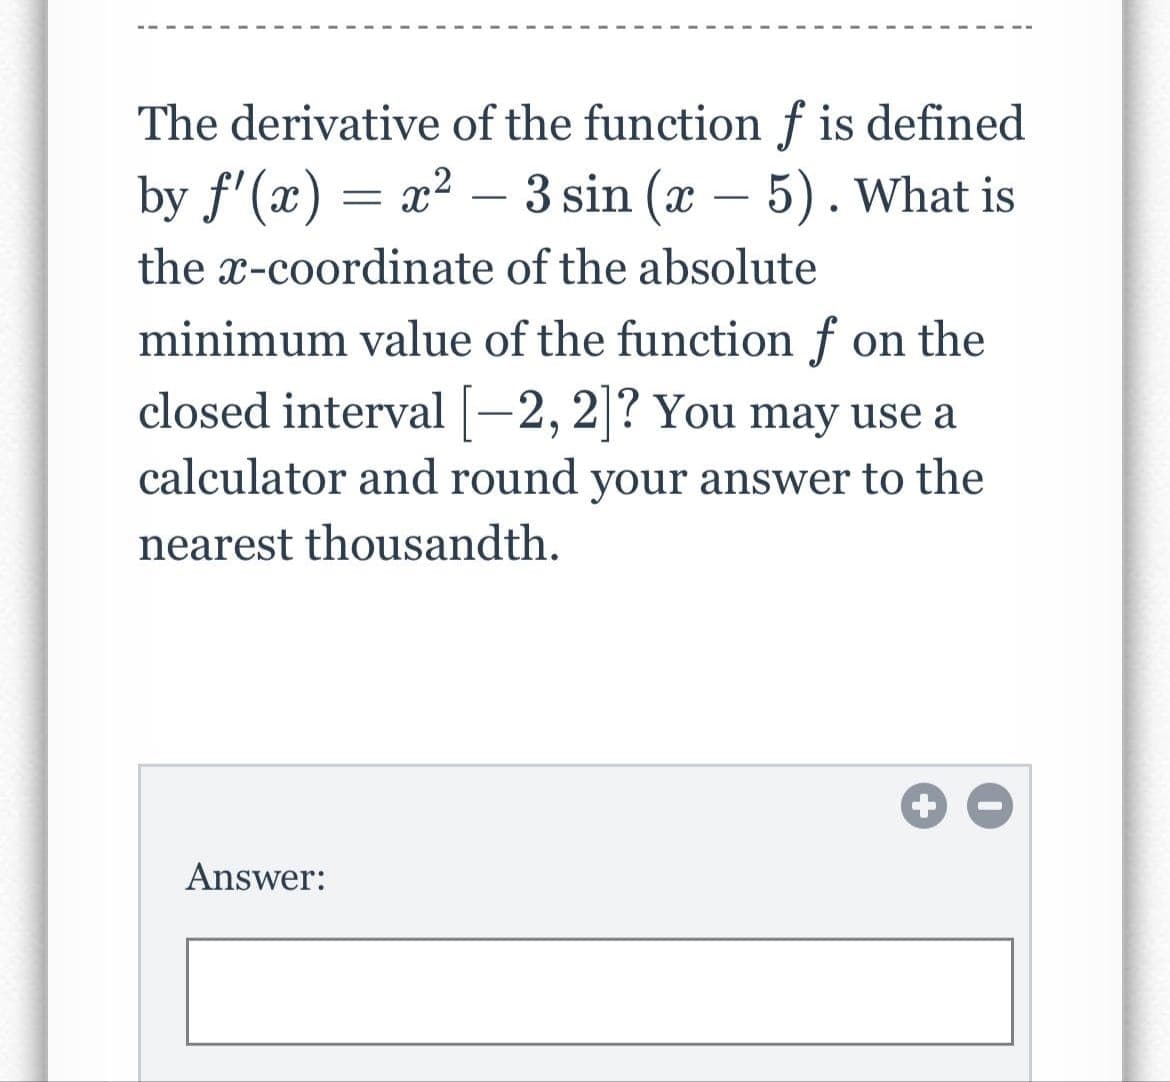 The derivative of the function f is defined
by f'(x)=x²-3 sin (x - 5). What is
the x-coordinate of the absolute
minimum value of the function f on the
closed interval [-2, 2]? You may use a
calculator and round your answer to the
nearest thousandth.
Answer: